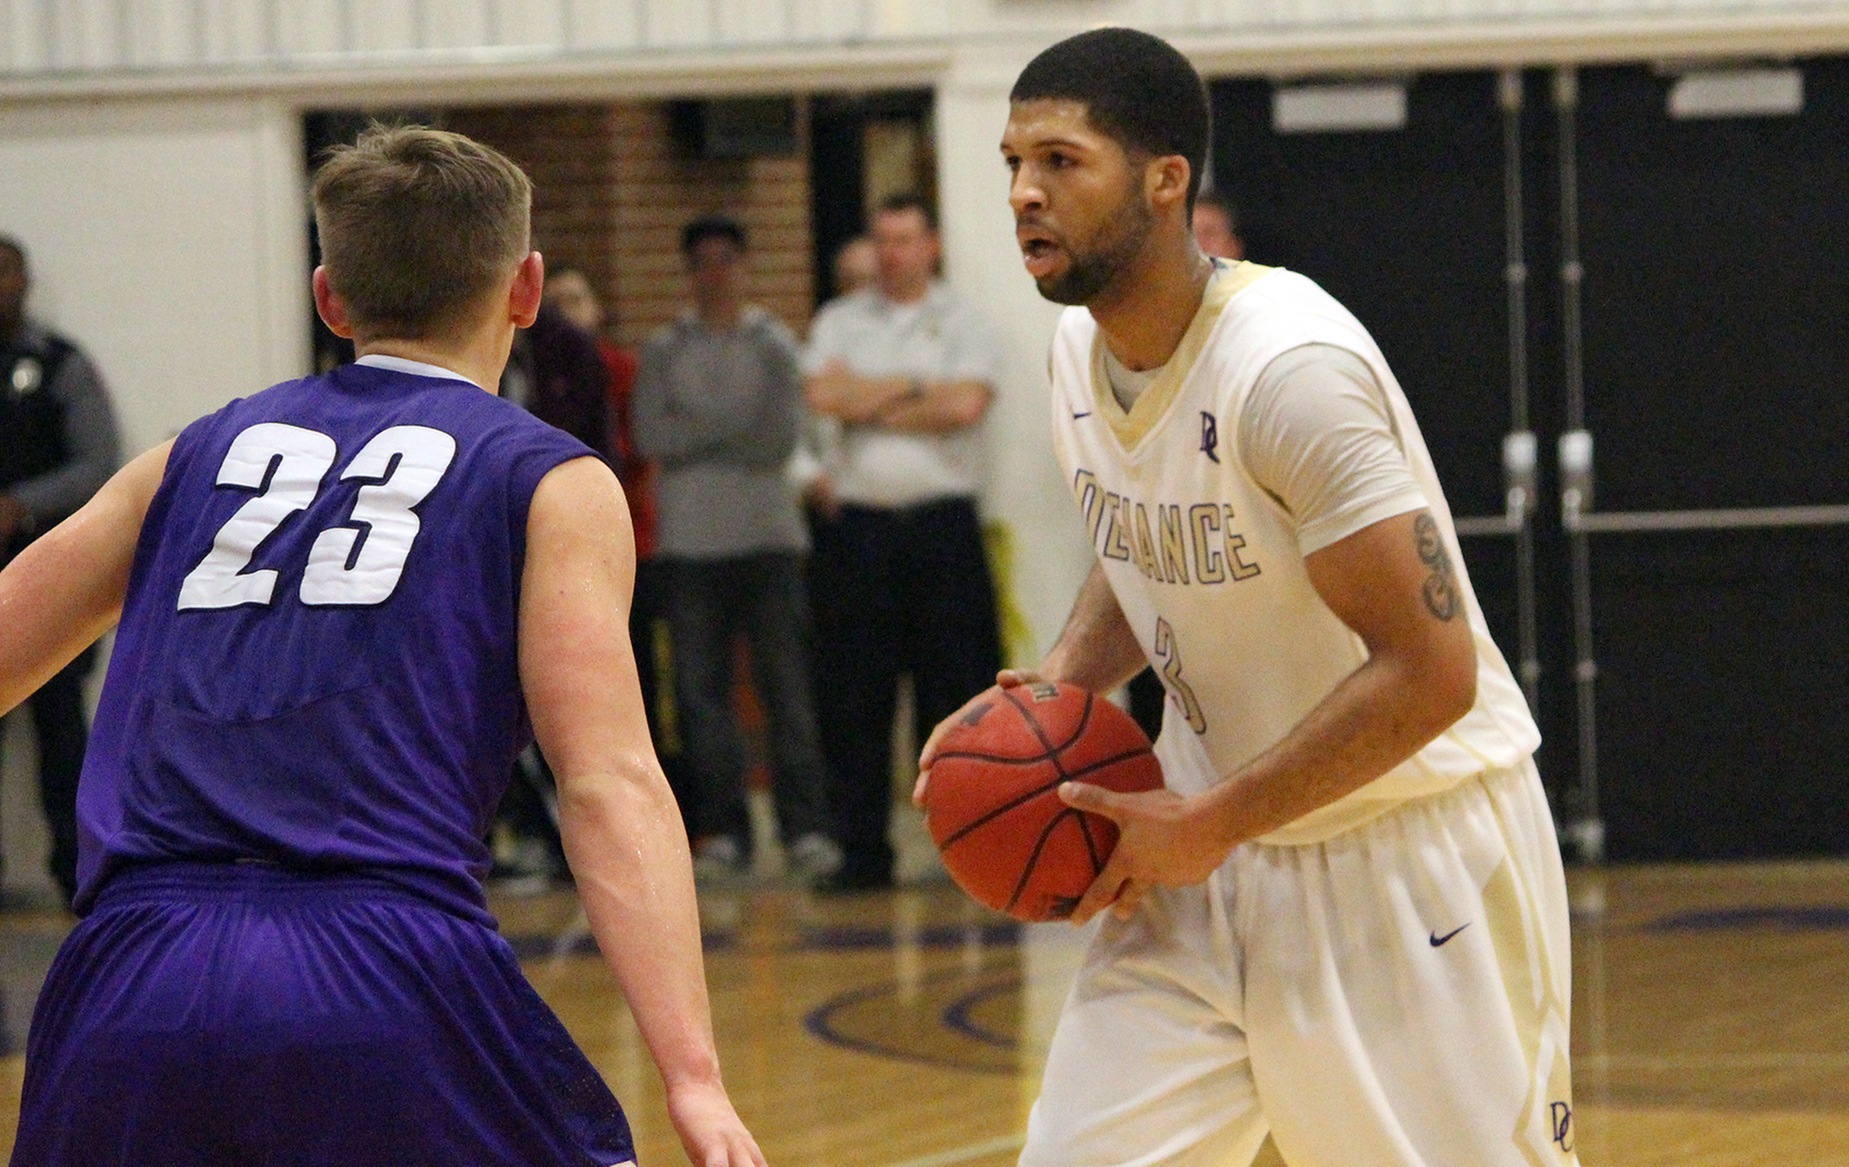 Yellow Jackets cruise to 55-42 victory over rival Bluffton